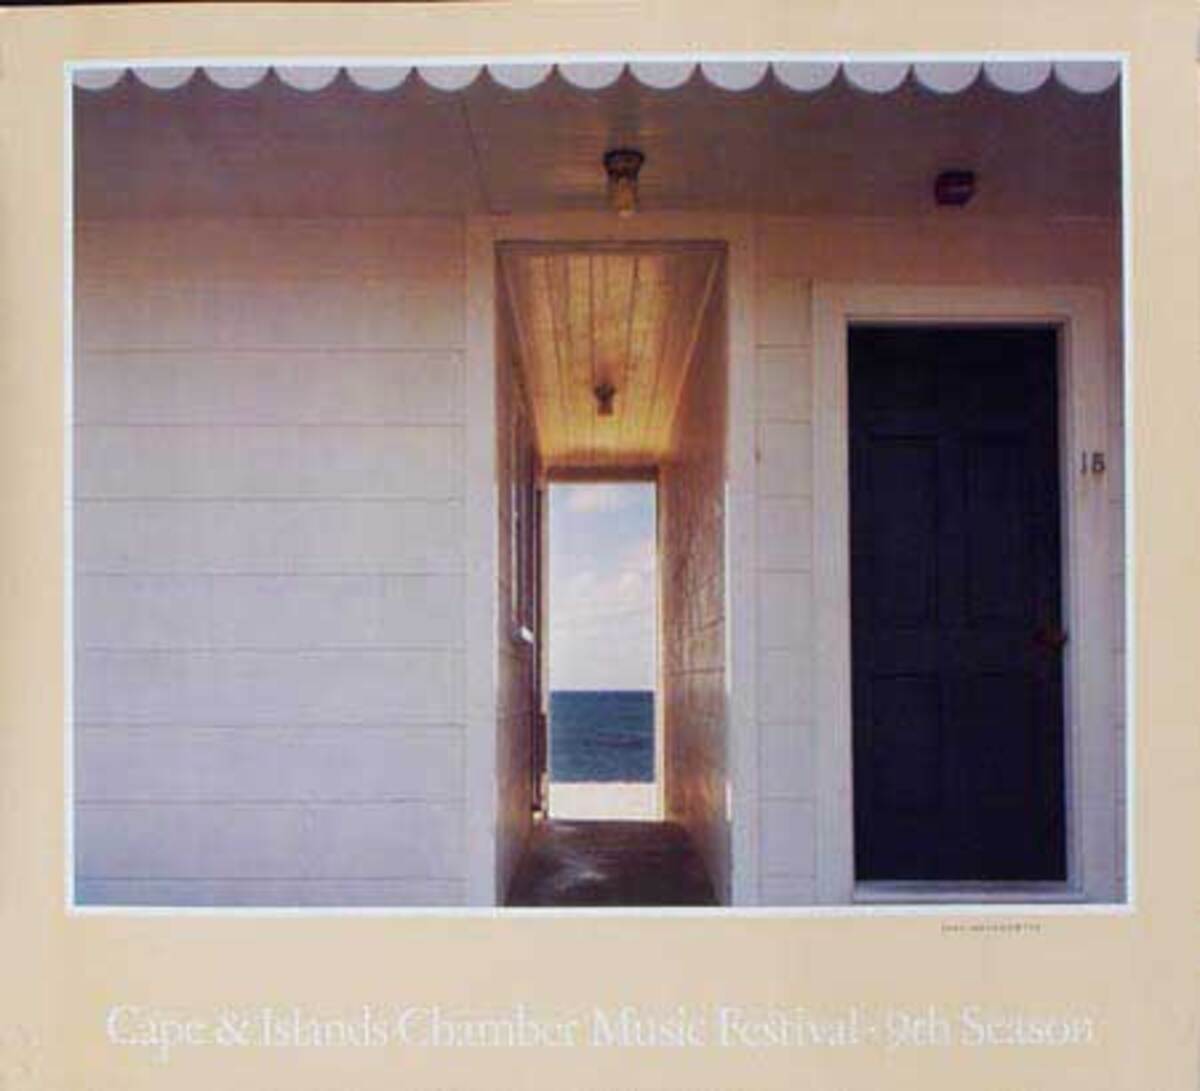 Cape and Islands Chamber Music Festival 9th Season Original Advertising Poster